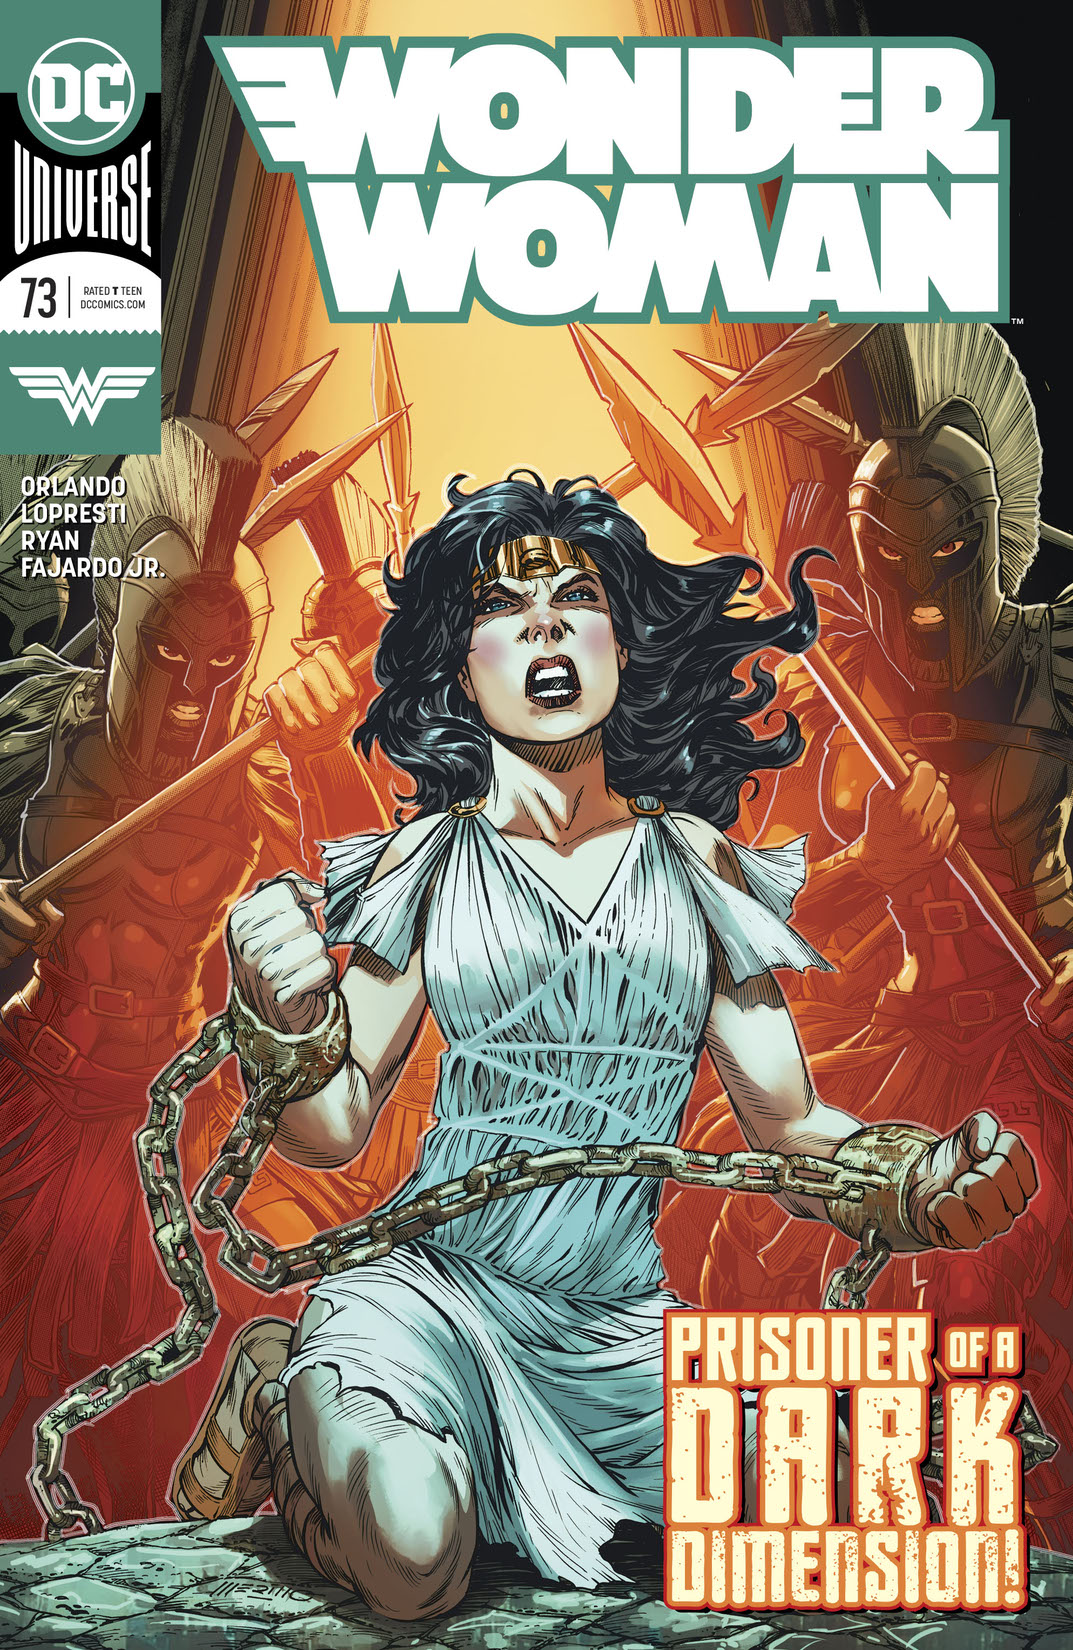 Wonder Woman (2016-) #73 preview images